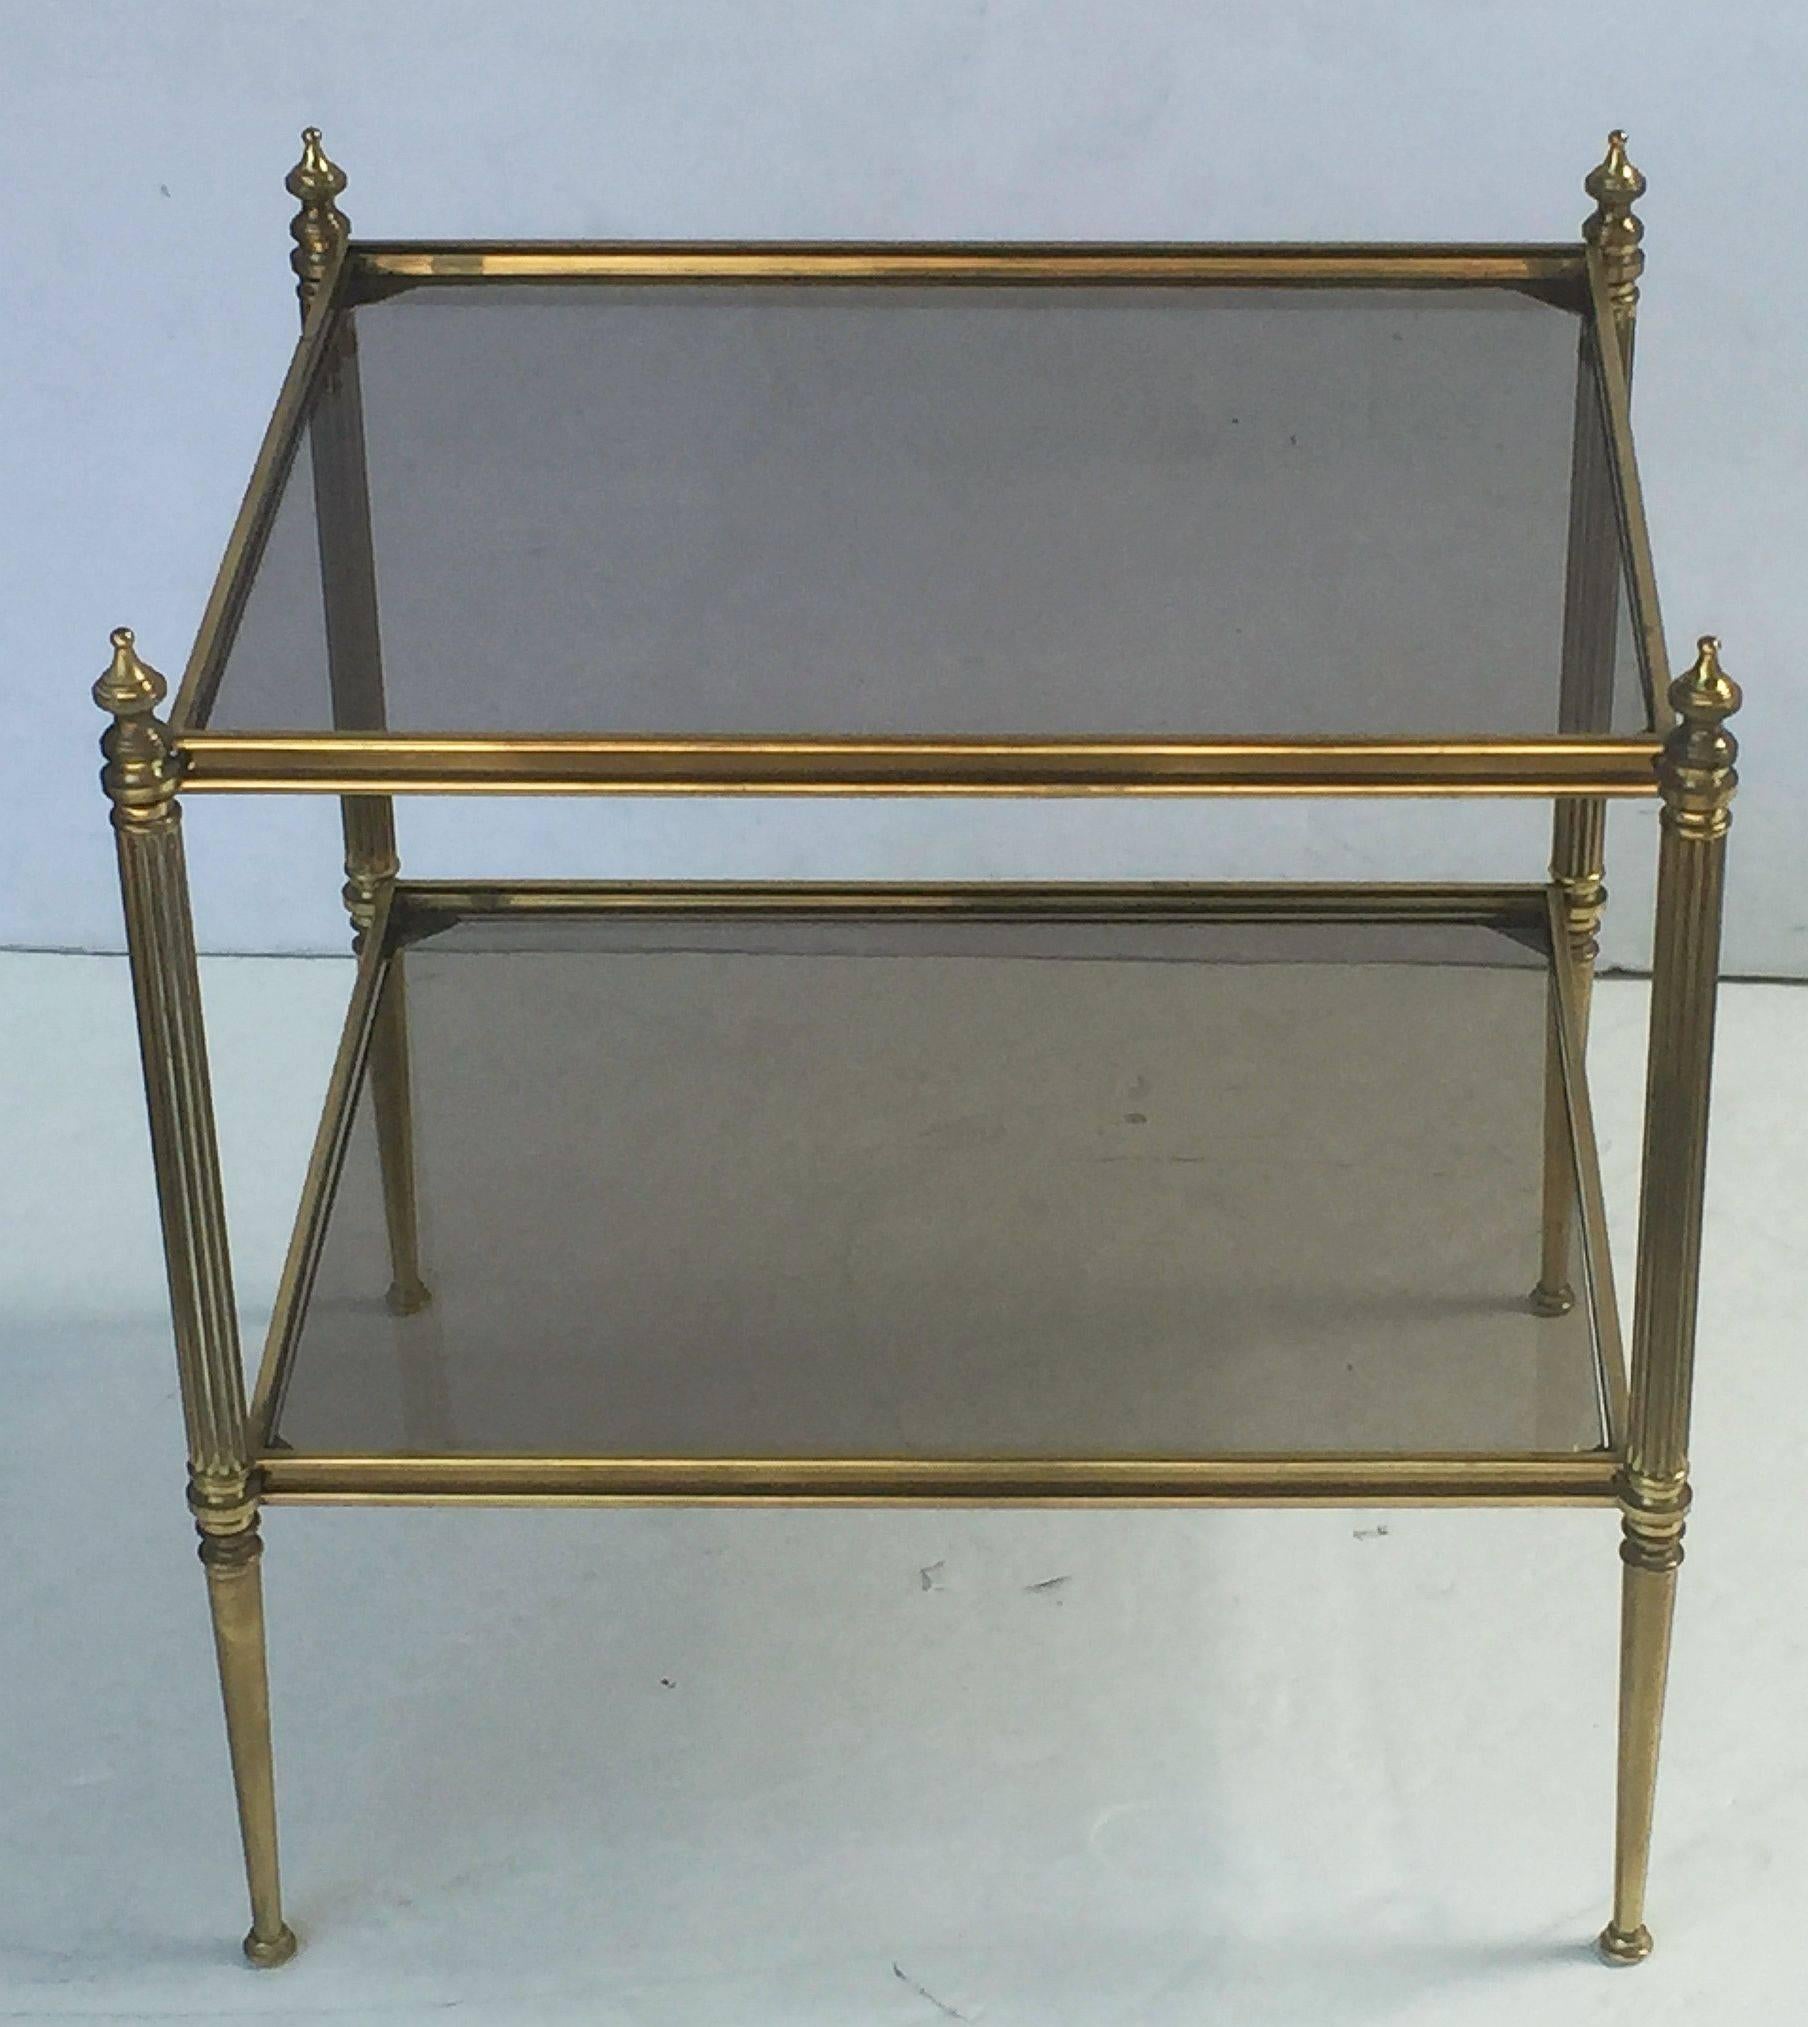 A fine French rectangular coffee or cocktail table, featuring two tiers of smoked glass and a stretcher frame of brass with tapering legs and finials.